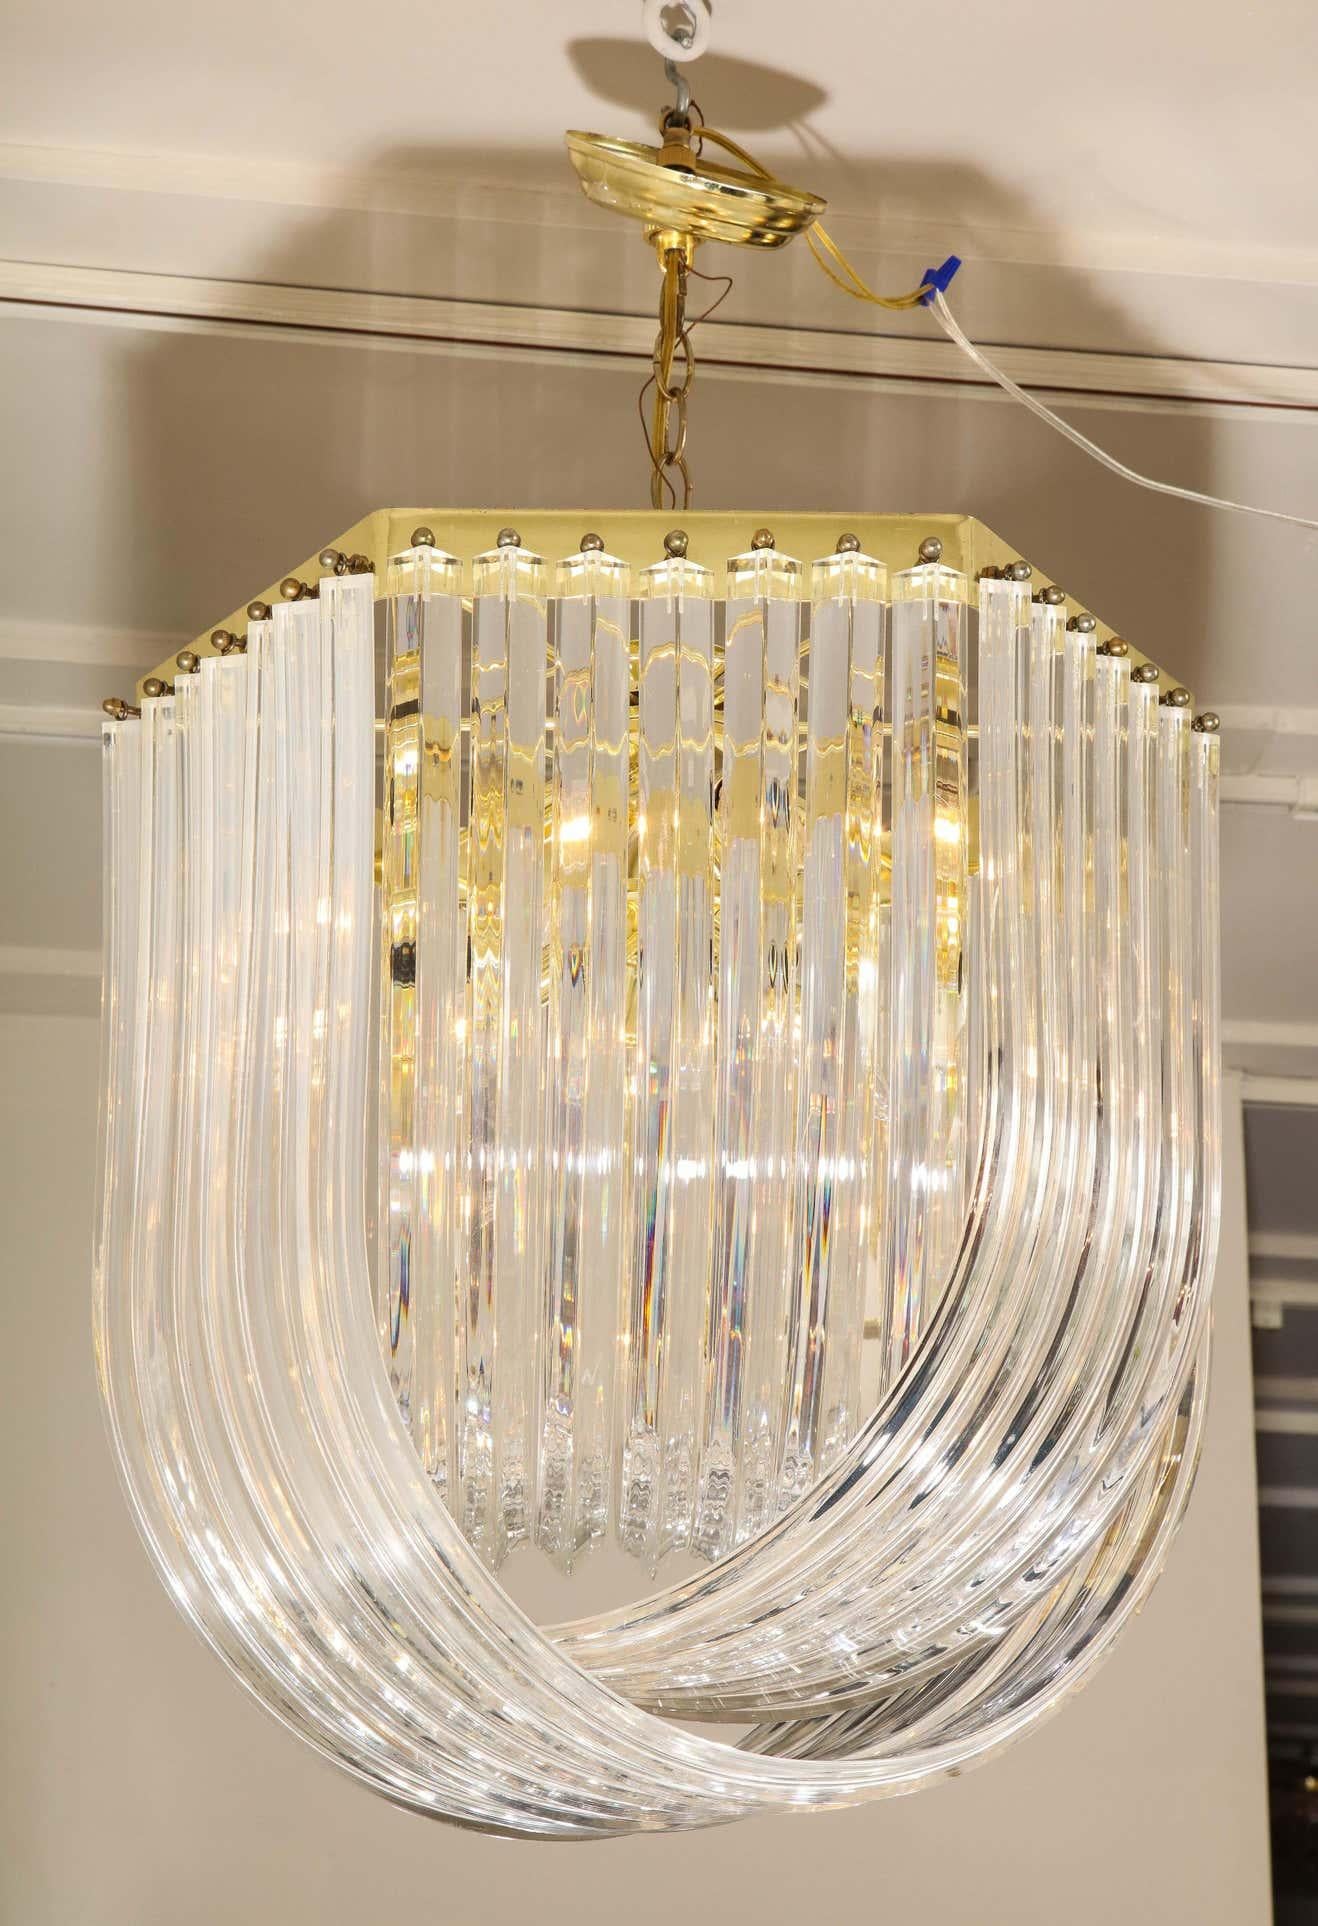 Midcentury Curved Lucite Ribbon Chandelier in Brass In Good Condition For Sale In New York, NY